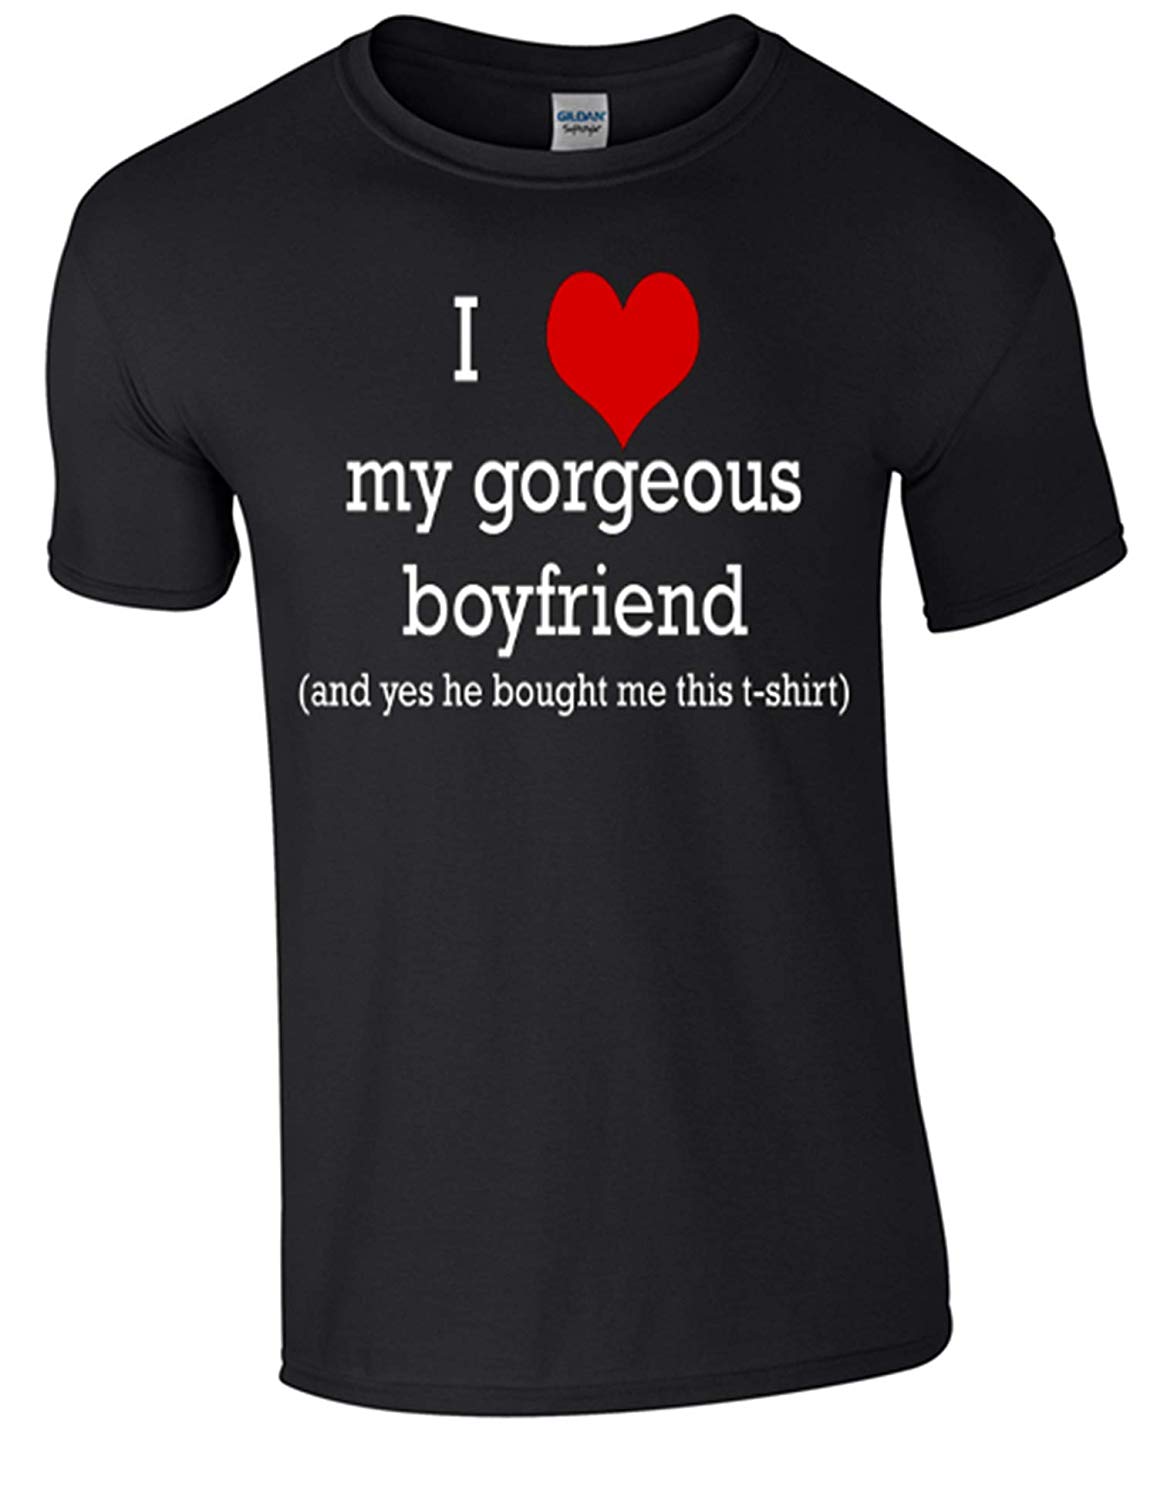 Army 1157 Kit Valentine My Gorgeous Boyfriend T-Shirt Printed DTG (Direct to Garment) for a Permanent Finish - Army 1157 kit Black / XL Army 1157 Kit Veterans Owned Business